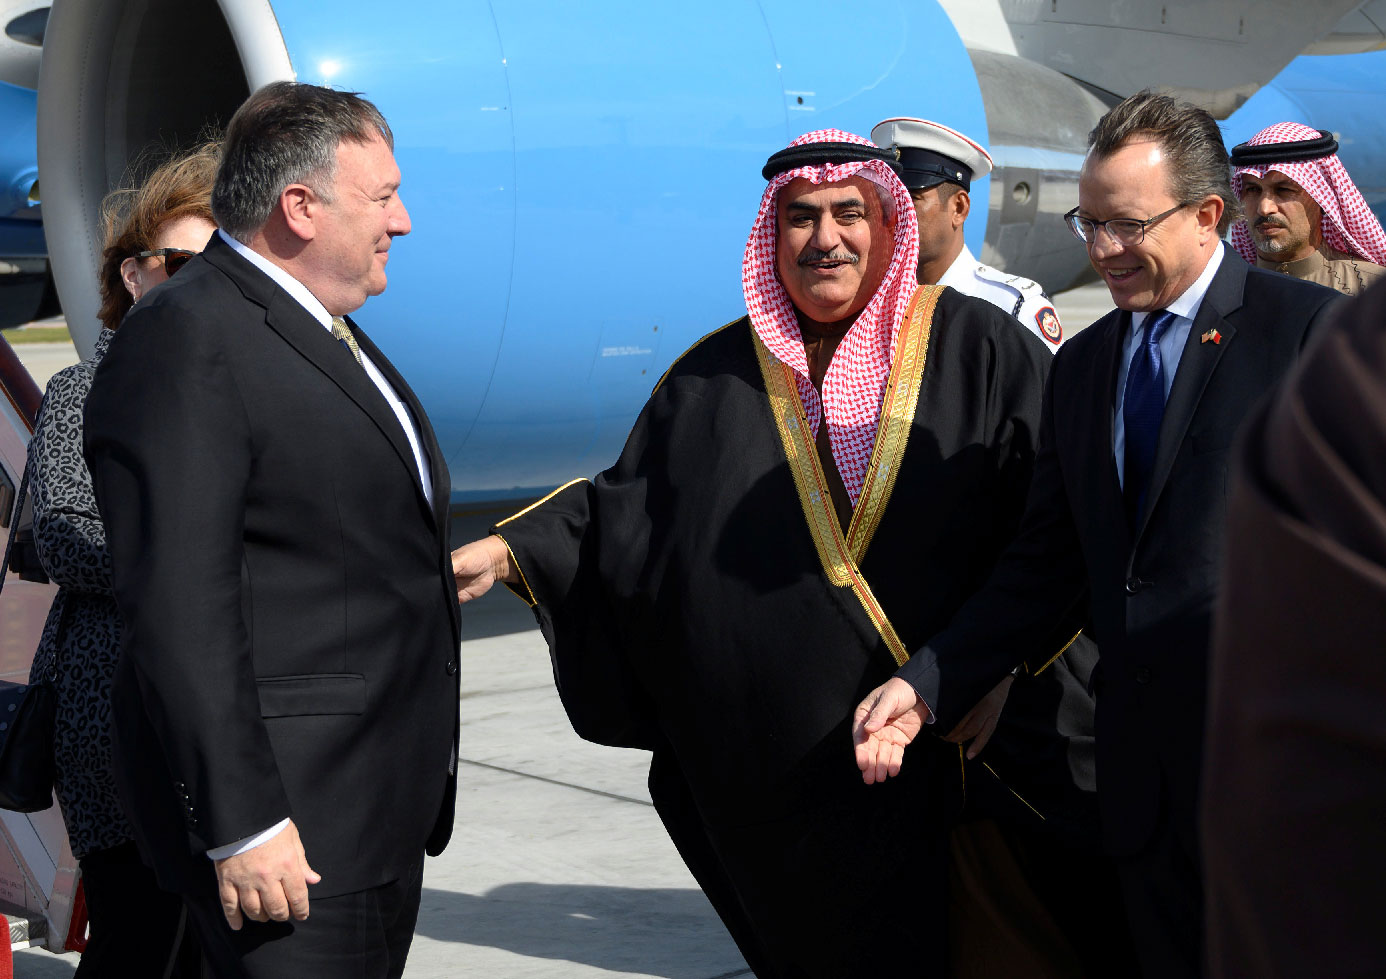 US Secretary of State Mike Pompeo is greeted by Bahraini Foreign Minister Khalid bin Ahmed Al Khalifa after arriving at Manama International Airport in Manama, Bahrain, January 11, 2019.